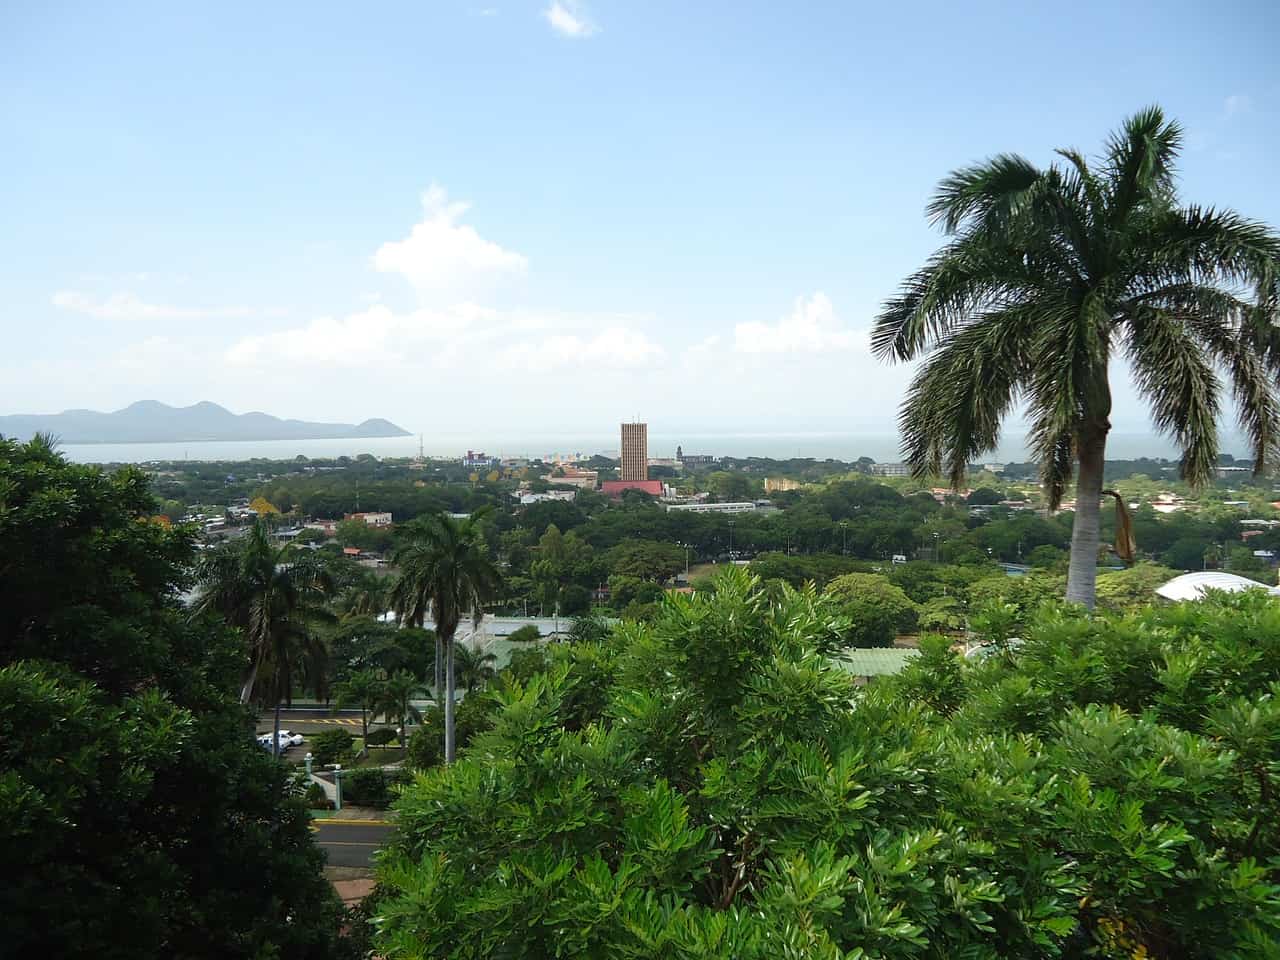 View of the shore and city of Managua, Nicaragua